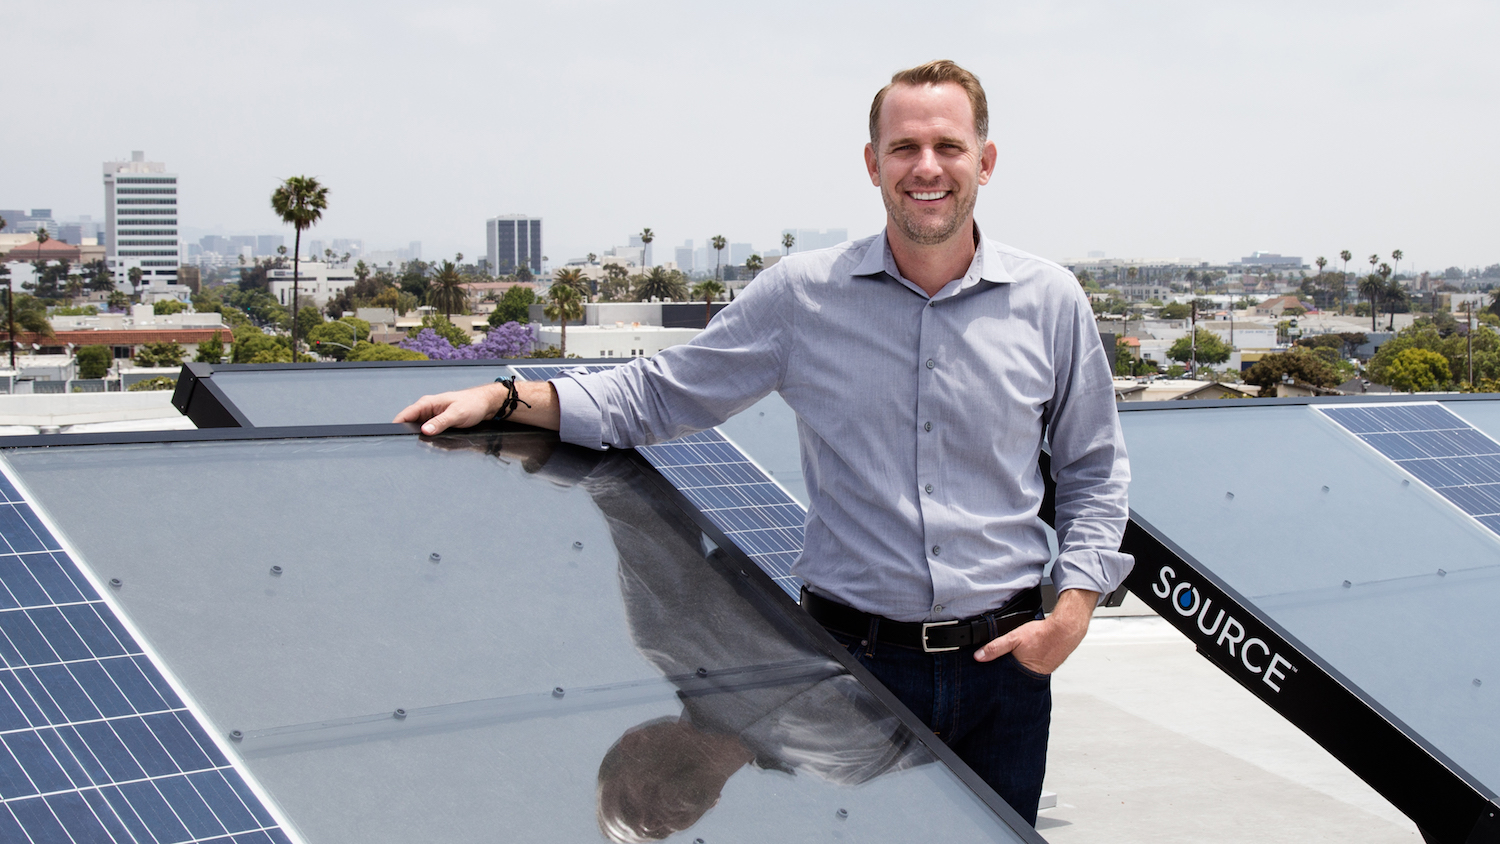 Cody Friesen stands on a roof among several SOURCE hydropanels, which extract clean water from the air using only solar power. Friesen invented the panels and won the 2019 Lemelson-MIT Prize for this and other inventions for the developing world.